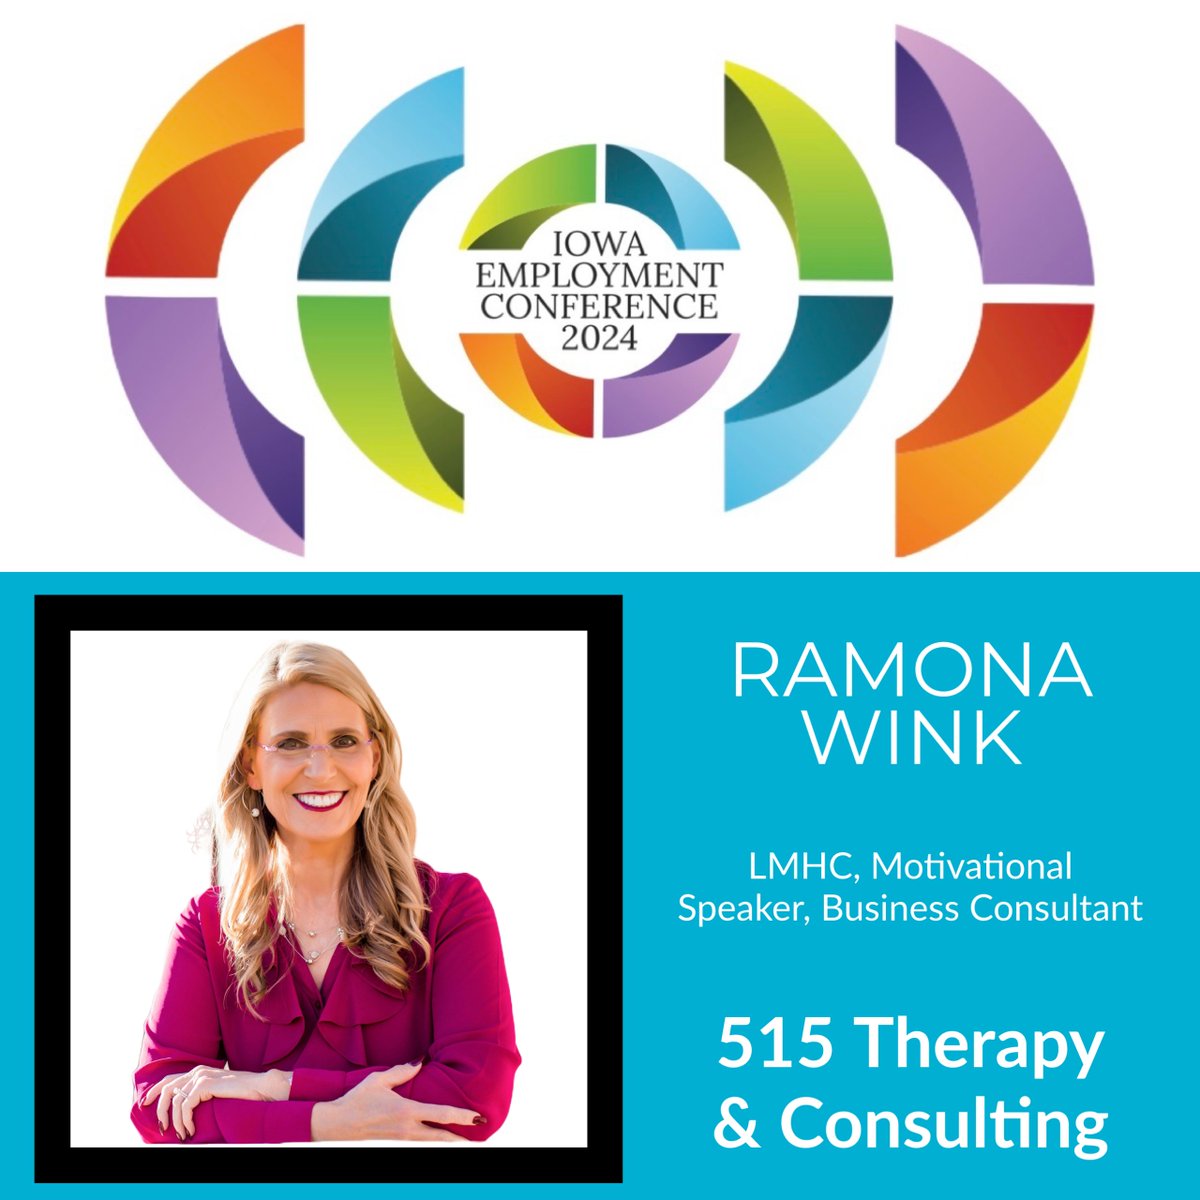 Excited to announce #IEC2024 Speaker, Ramona Wink, with 515 Therapy & Consulting. Bio here: conta.cc/42brAim Register to see Ramona in action! conta.cc/42d7wMI #continuingeducation #professionaldevelopment #humanresources #leadership